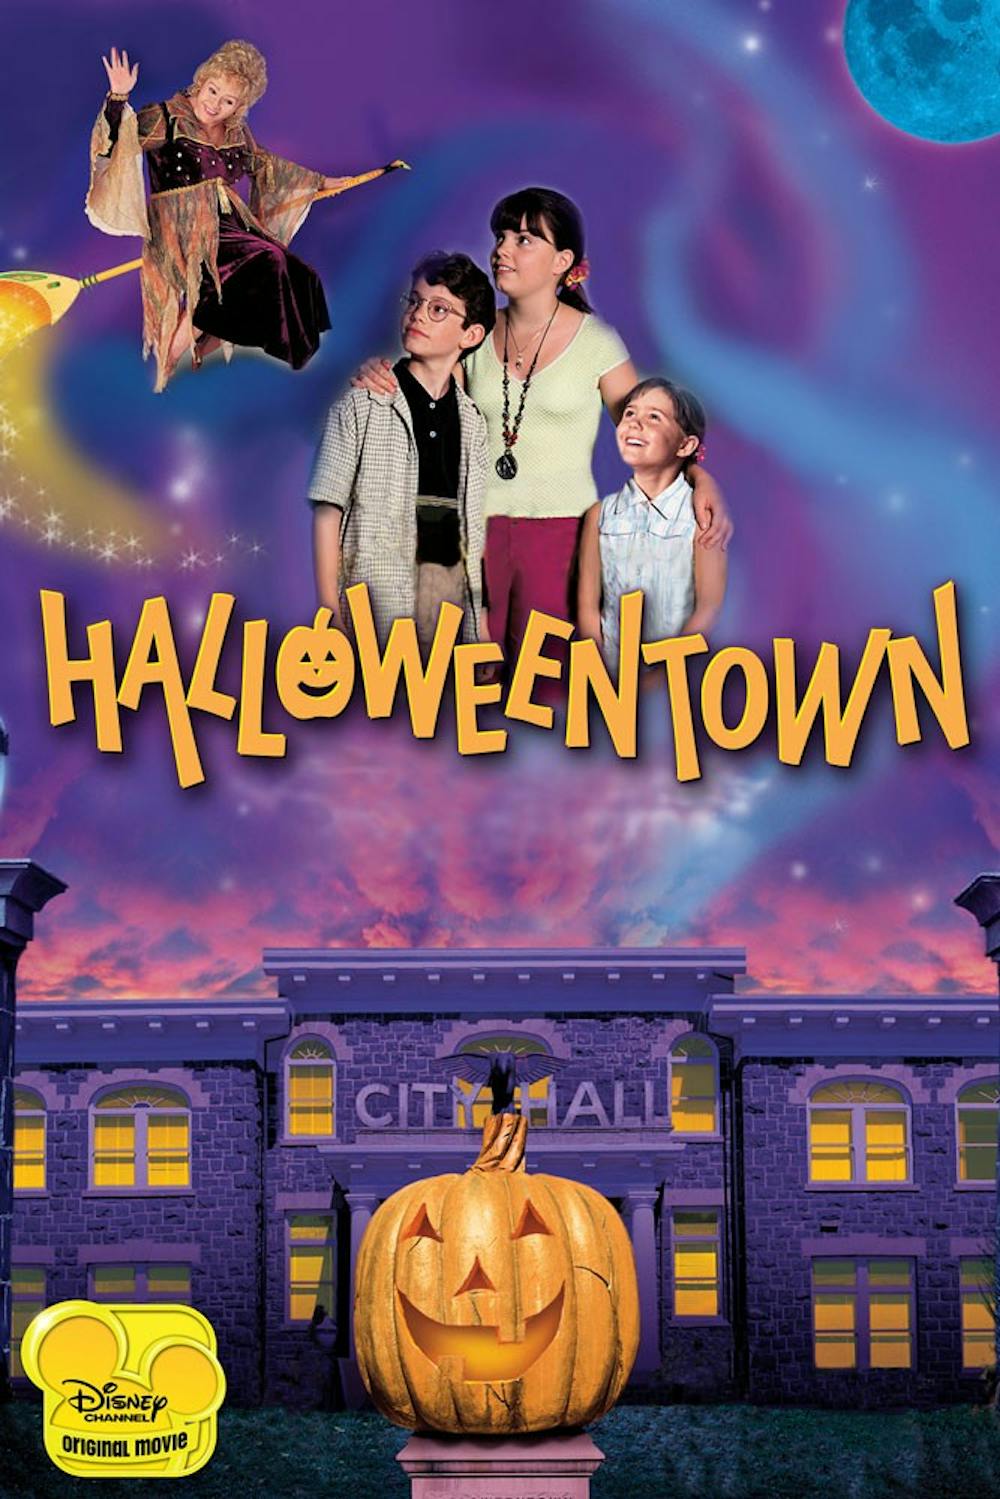 <p>Disney has a host of Halloween movies that were instant classics when they came out. This nostalgic list is filled with some of the greatest movies from the ’90s and ’00s such as “Halloween Town,” and “The Nightmare Before Christmas.”</p>